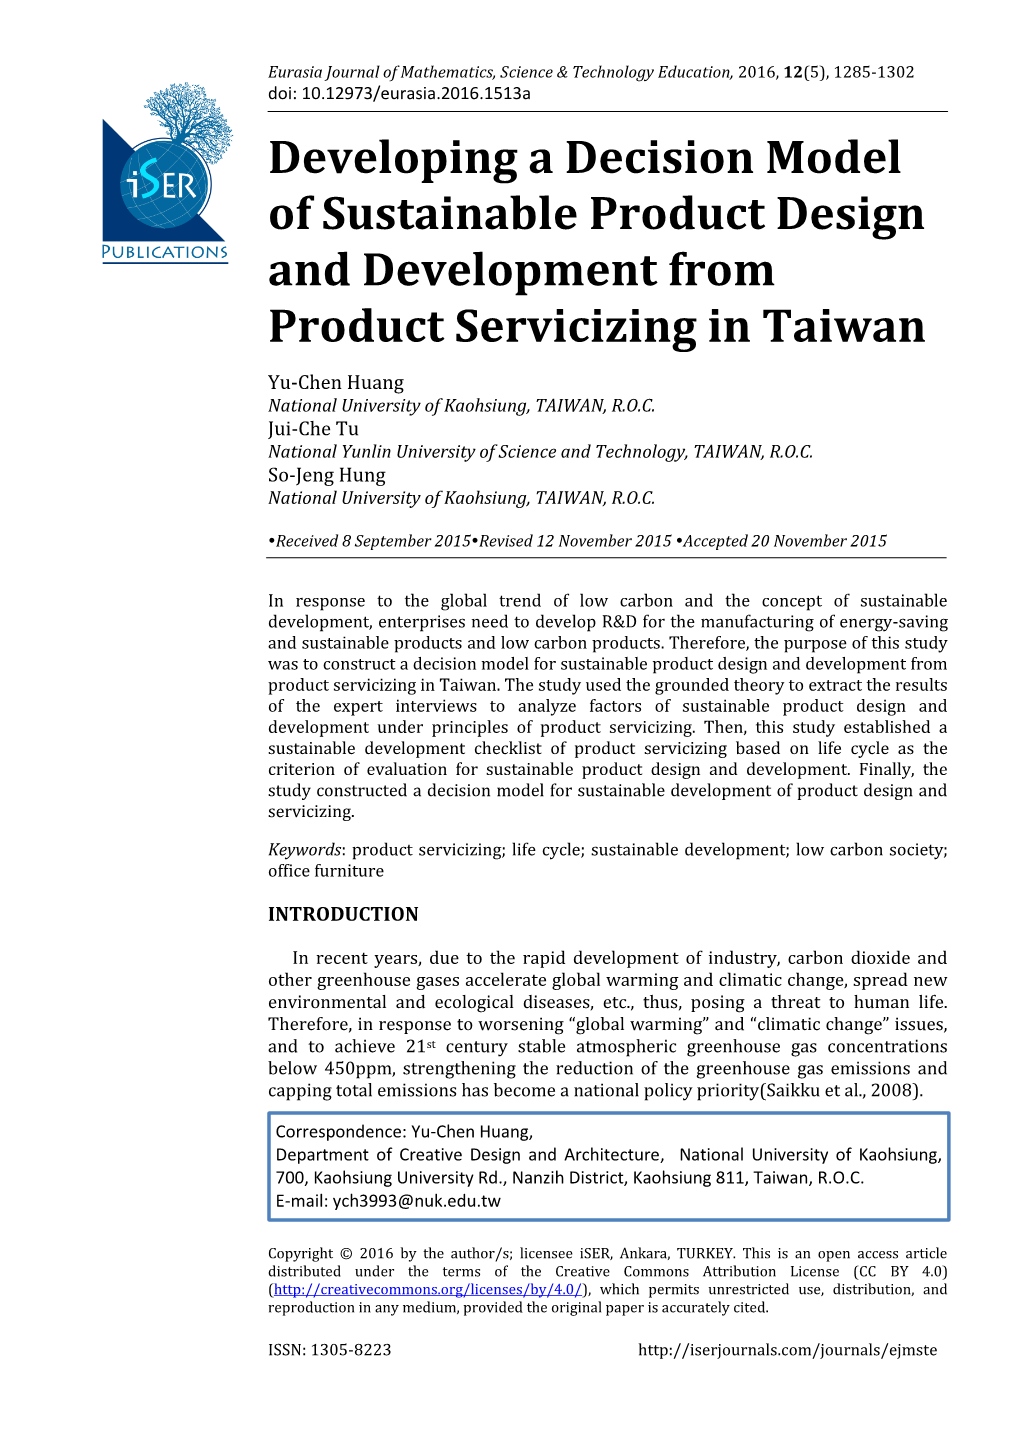 Developing a Decision Model of Sustainable Product Design and Development from Product Servicizing in Taiwan